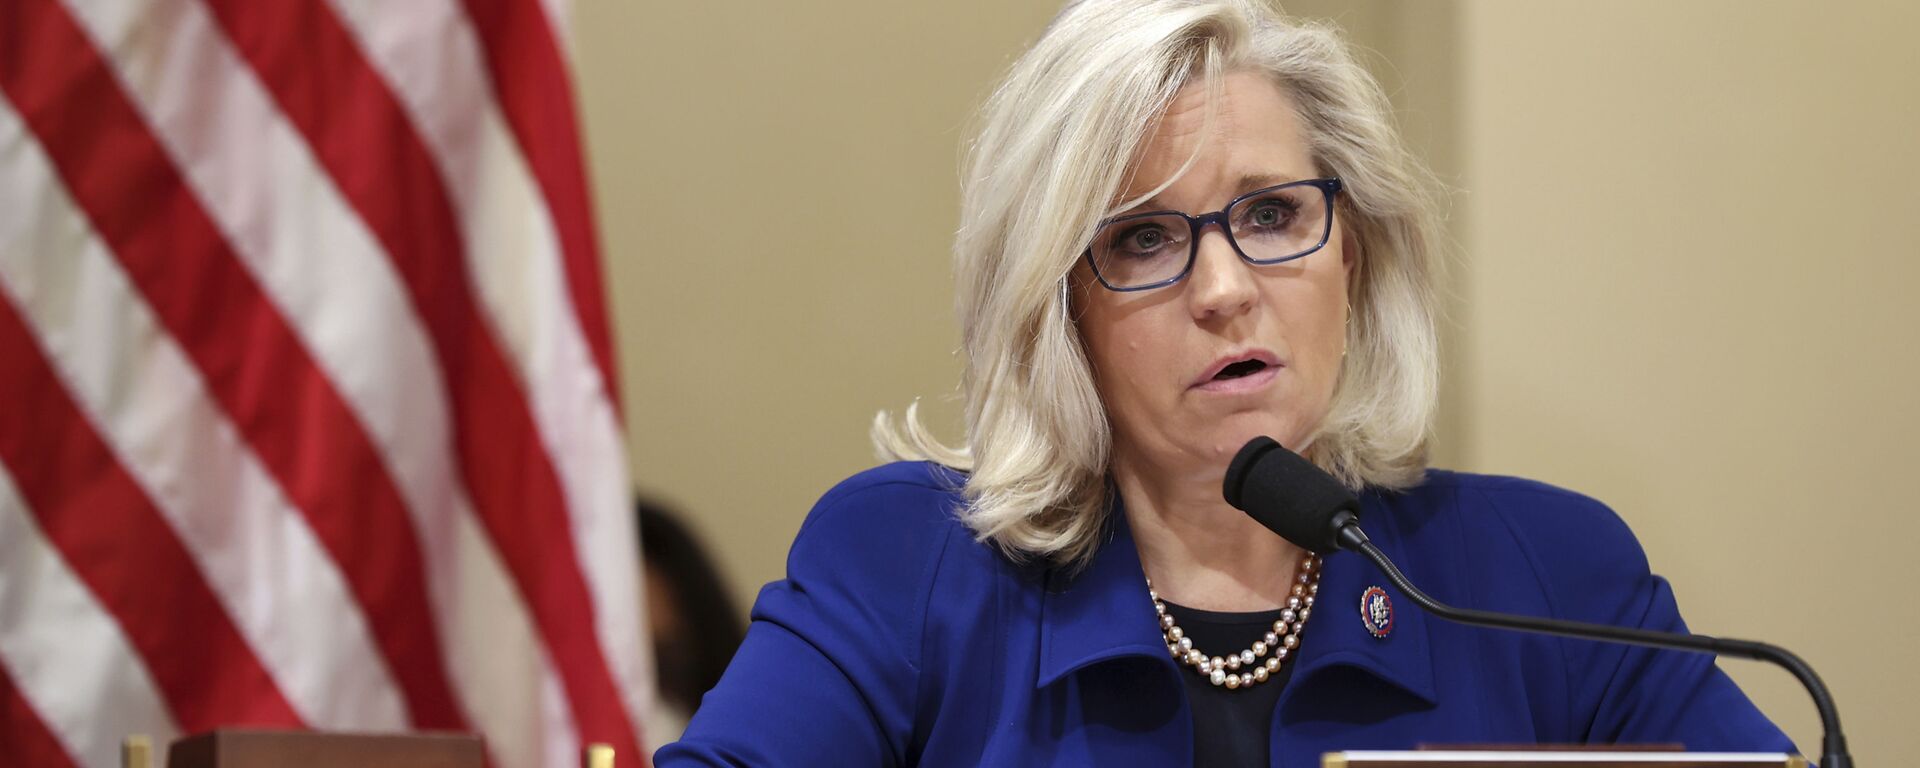 Rep. Liz Cheney, R-Wy., delivers opening remarks at the first hearing of the House select committee hearing on the Jan. 6 attack on Capitol Hill in Washington, Tuesday, July 27, 2021. - Sputnik International, 1920, 10.06.2022